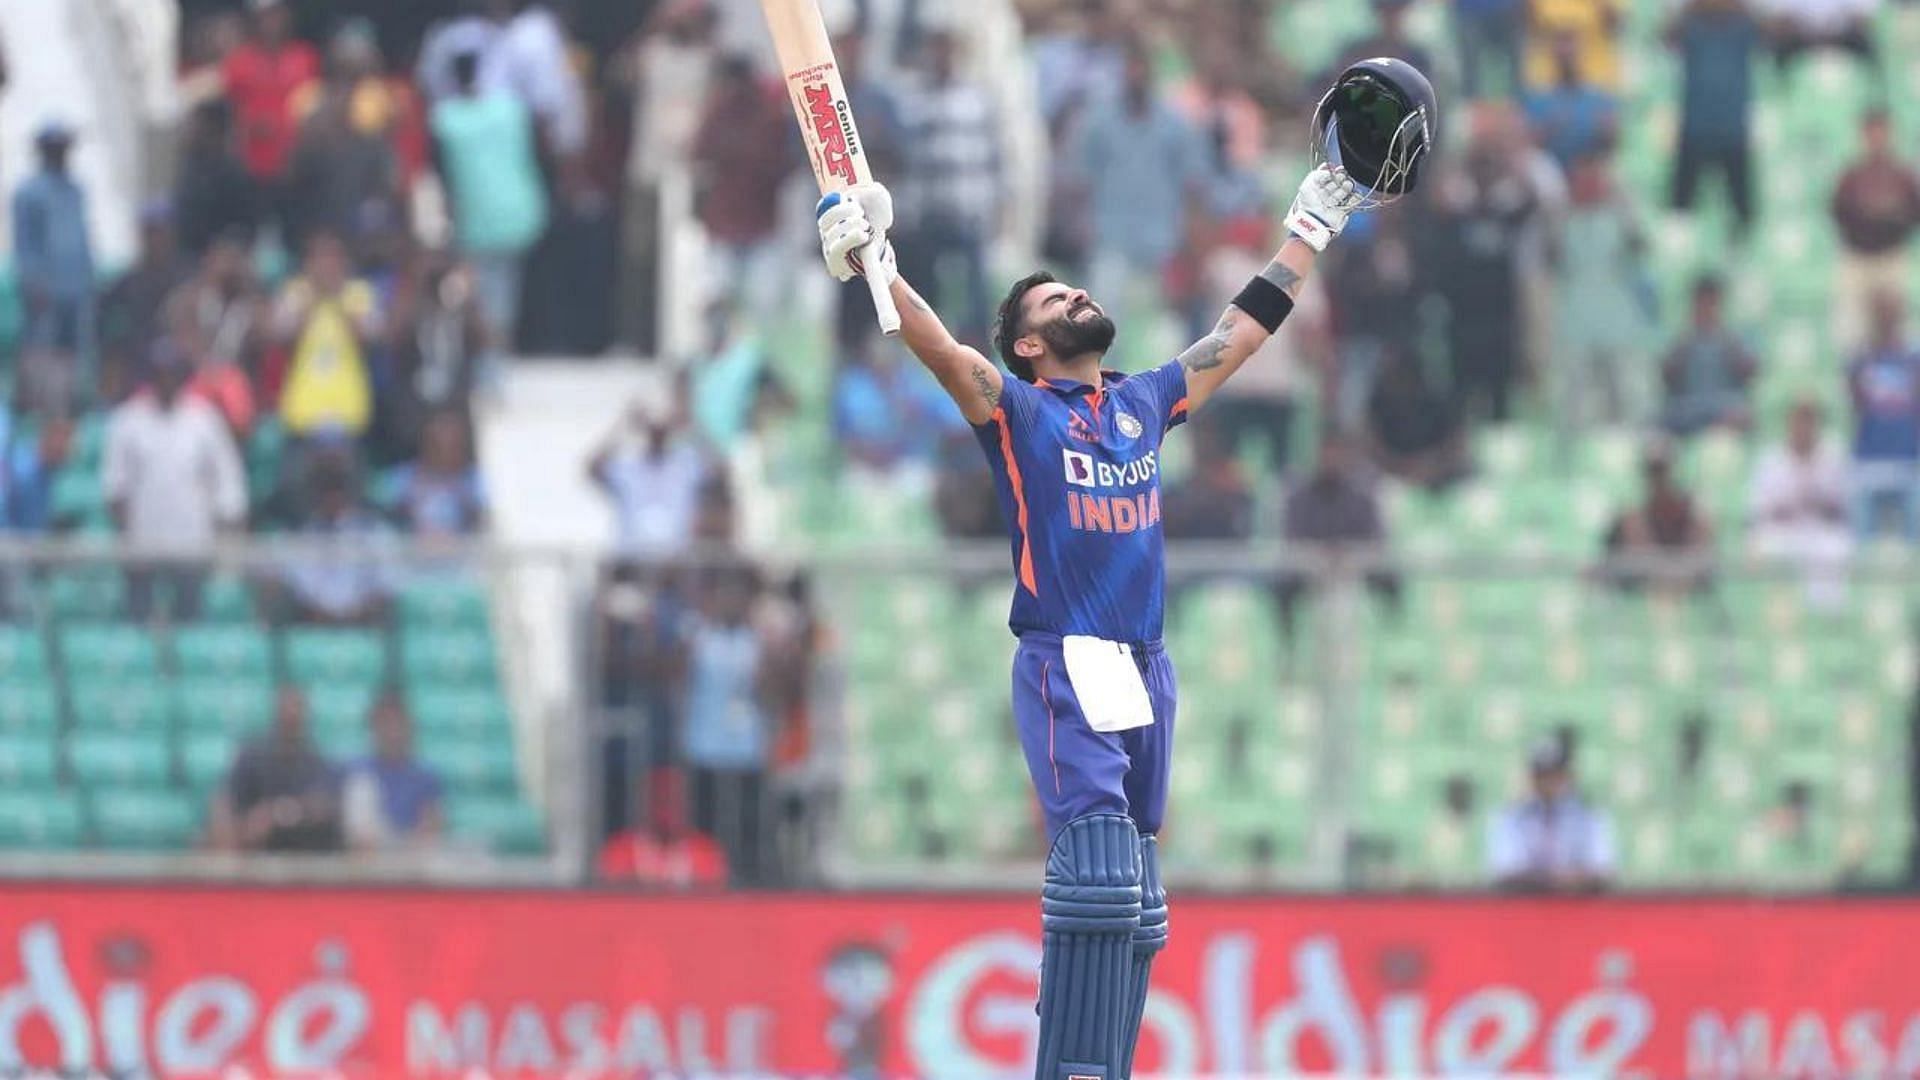 Virat Kohli hammered 183 against Pakistan in the 2012 Asia Cup.